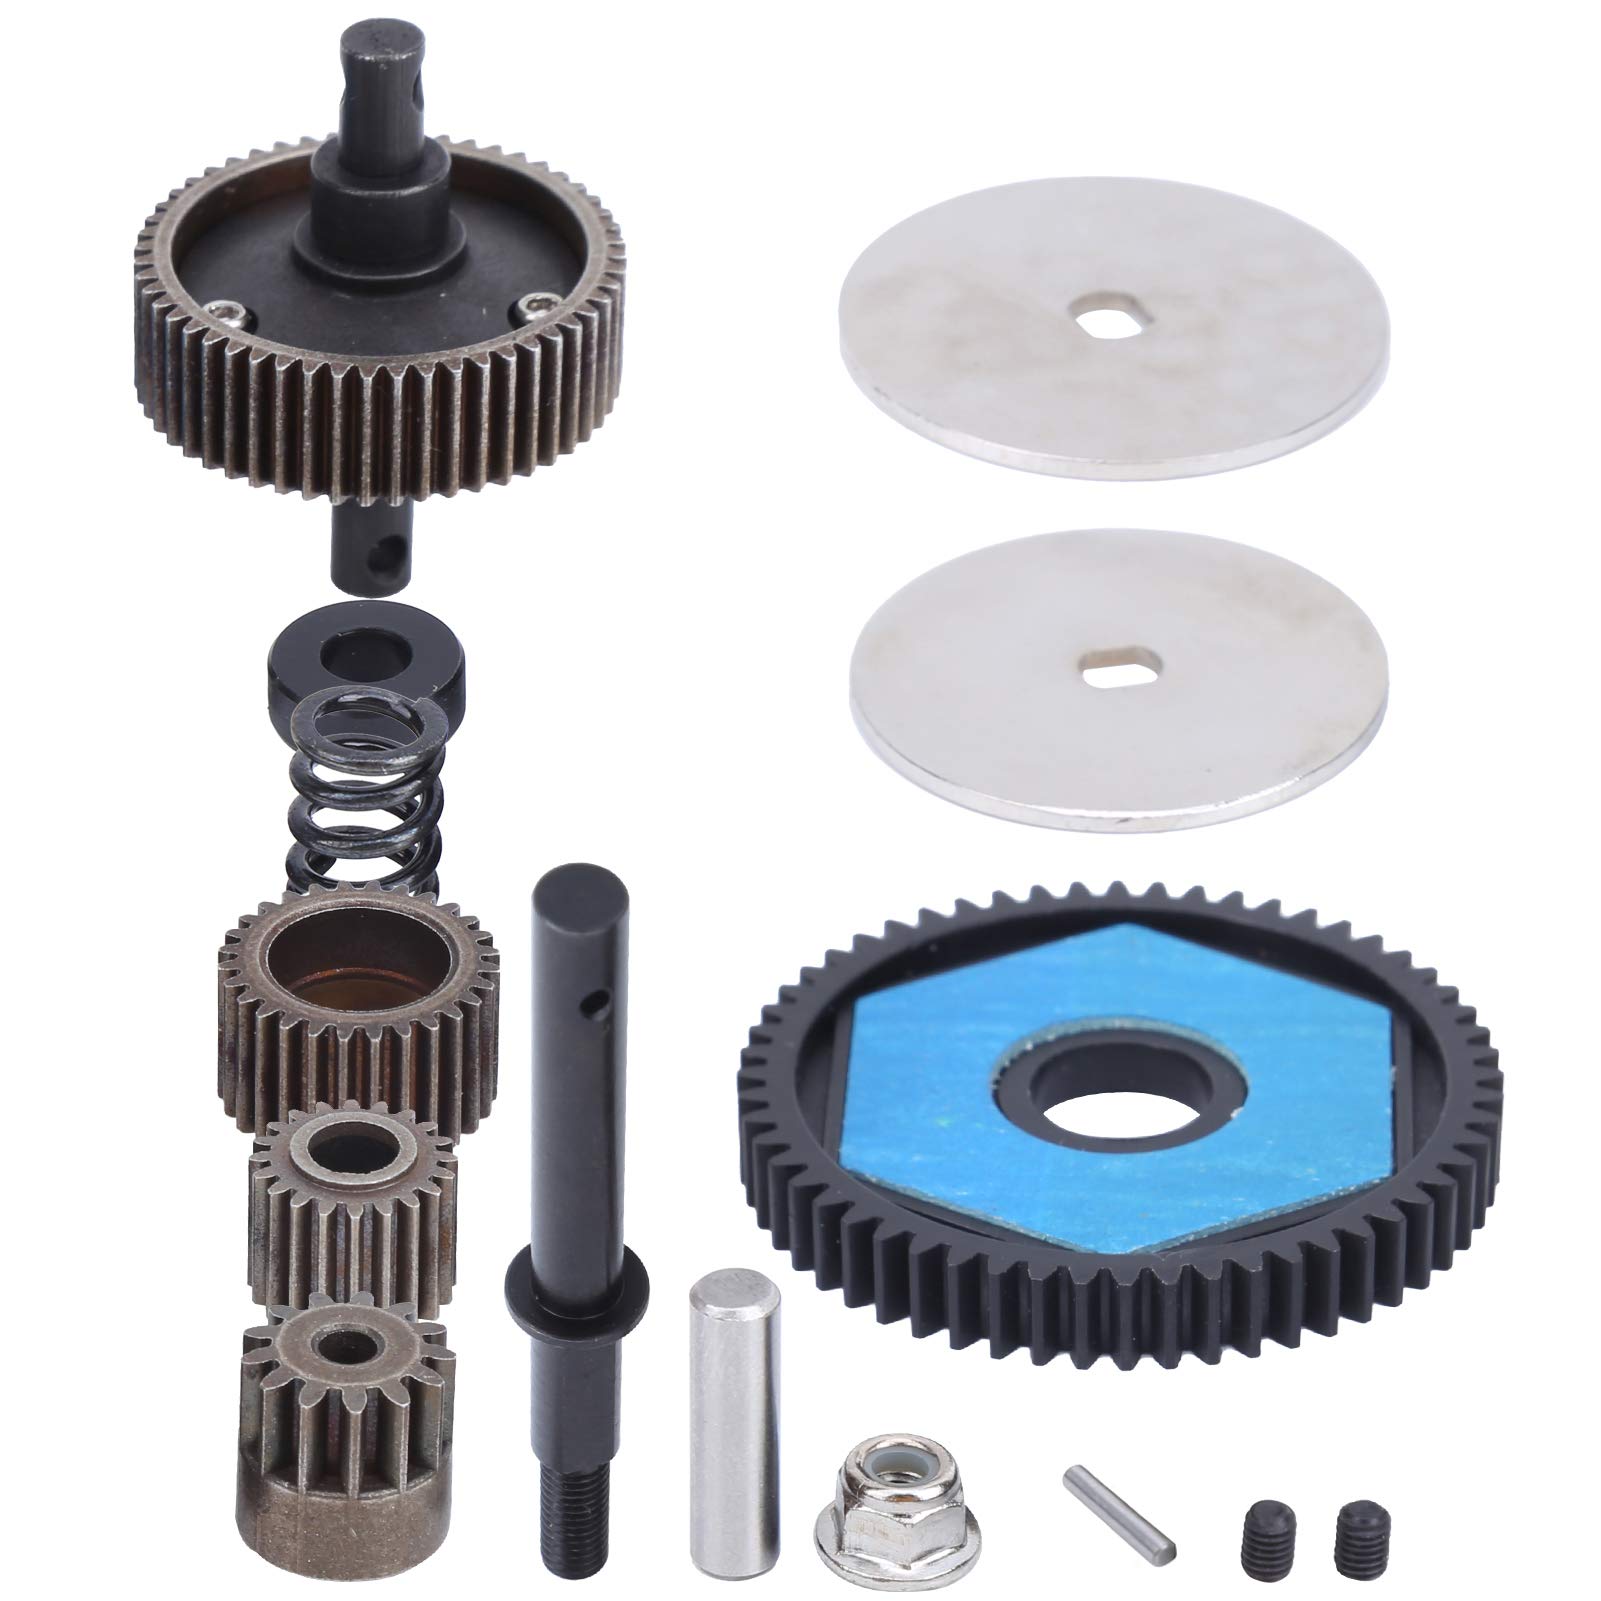 RC Car Transmission Gears with Motor Gear for Axial SCX10/SCX10 II 90046 90047, High Strength Steel Transmission Gears